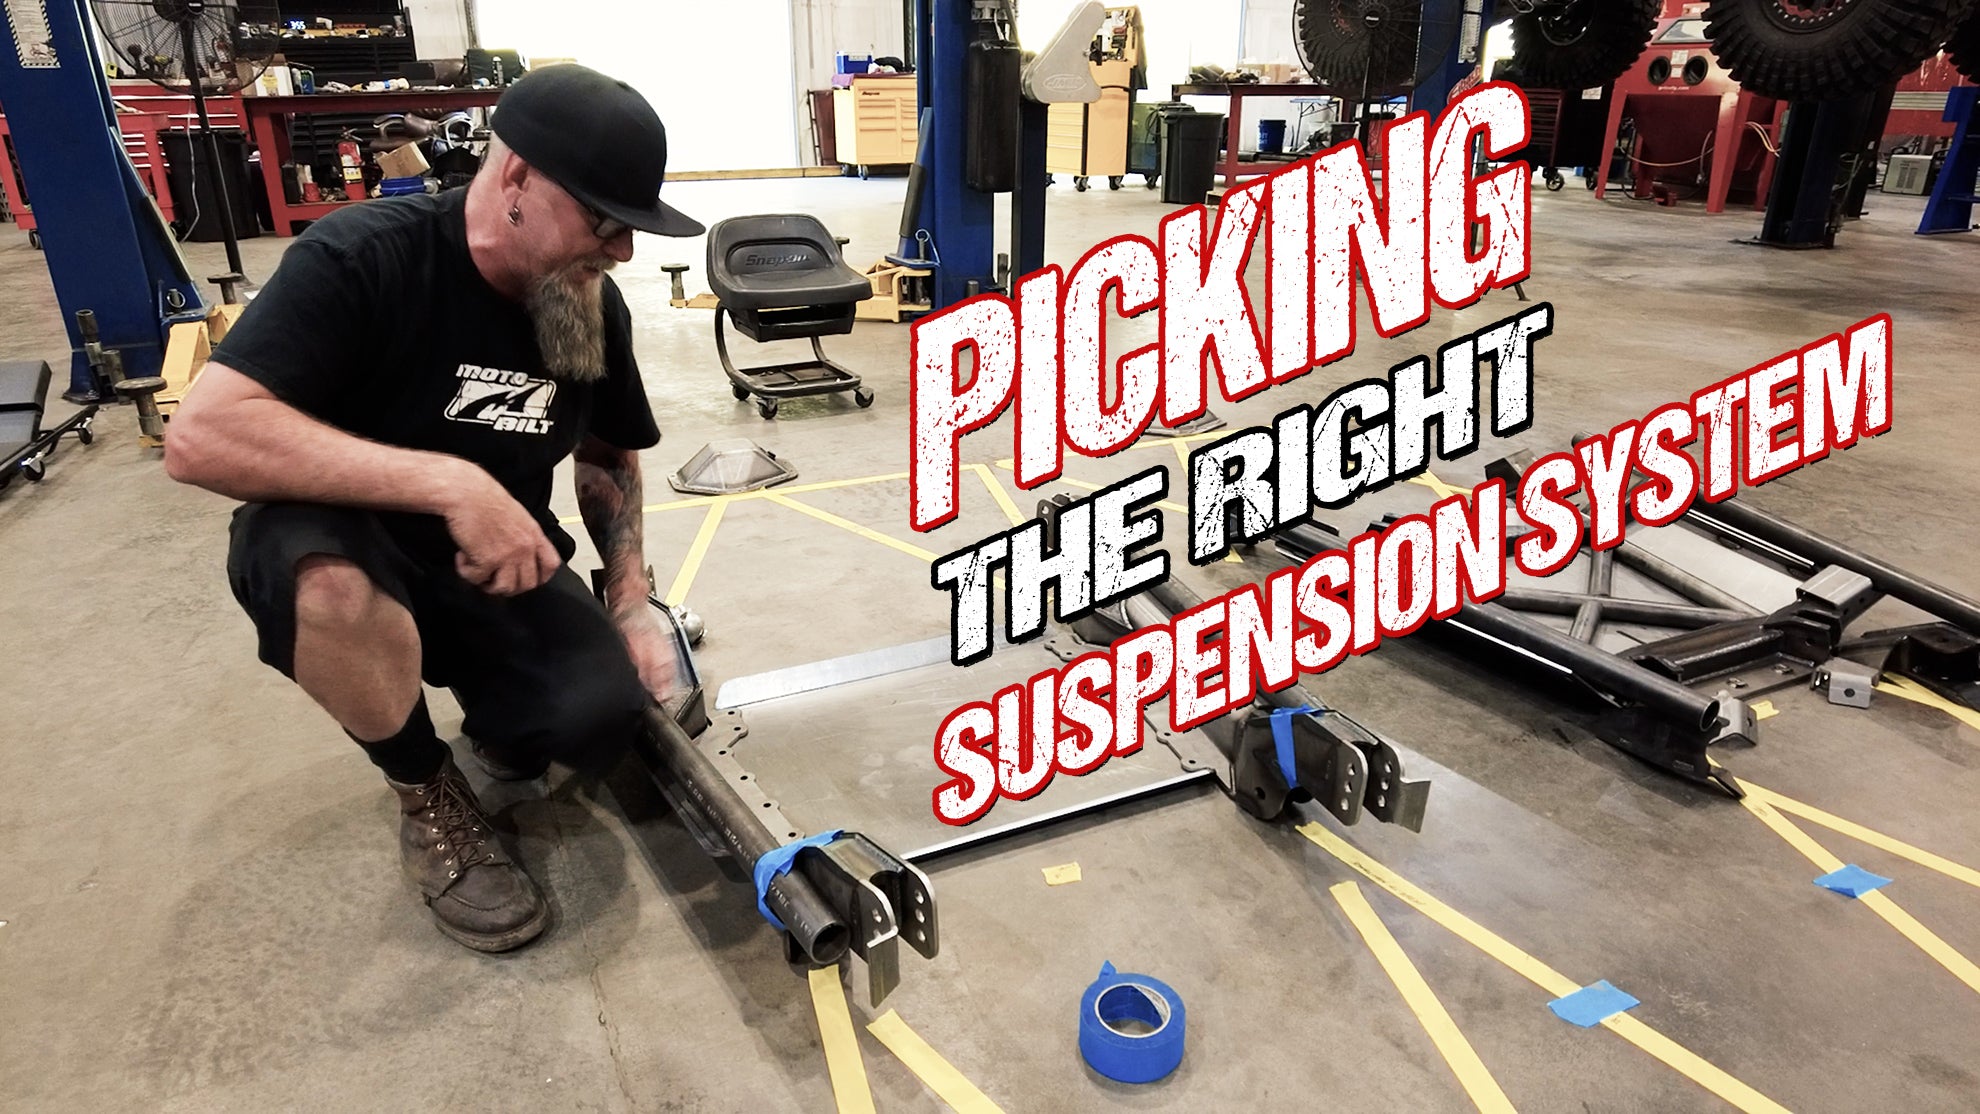 Picking the Right Suspension System